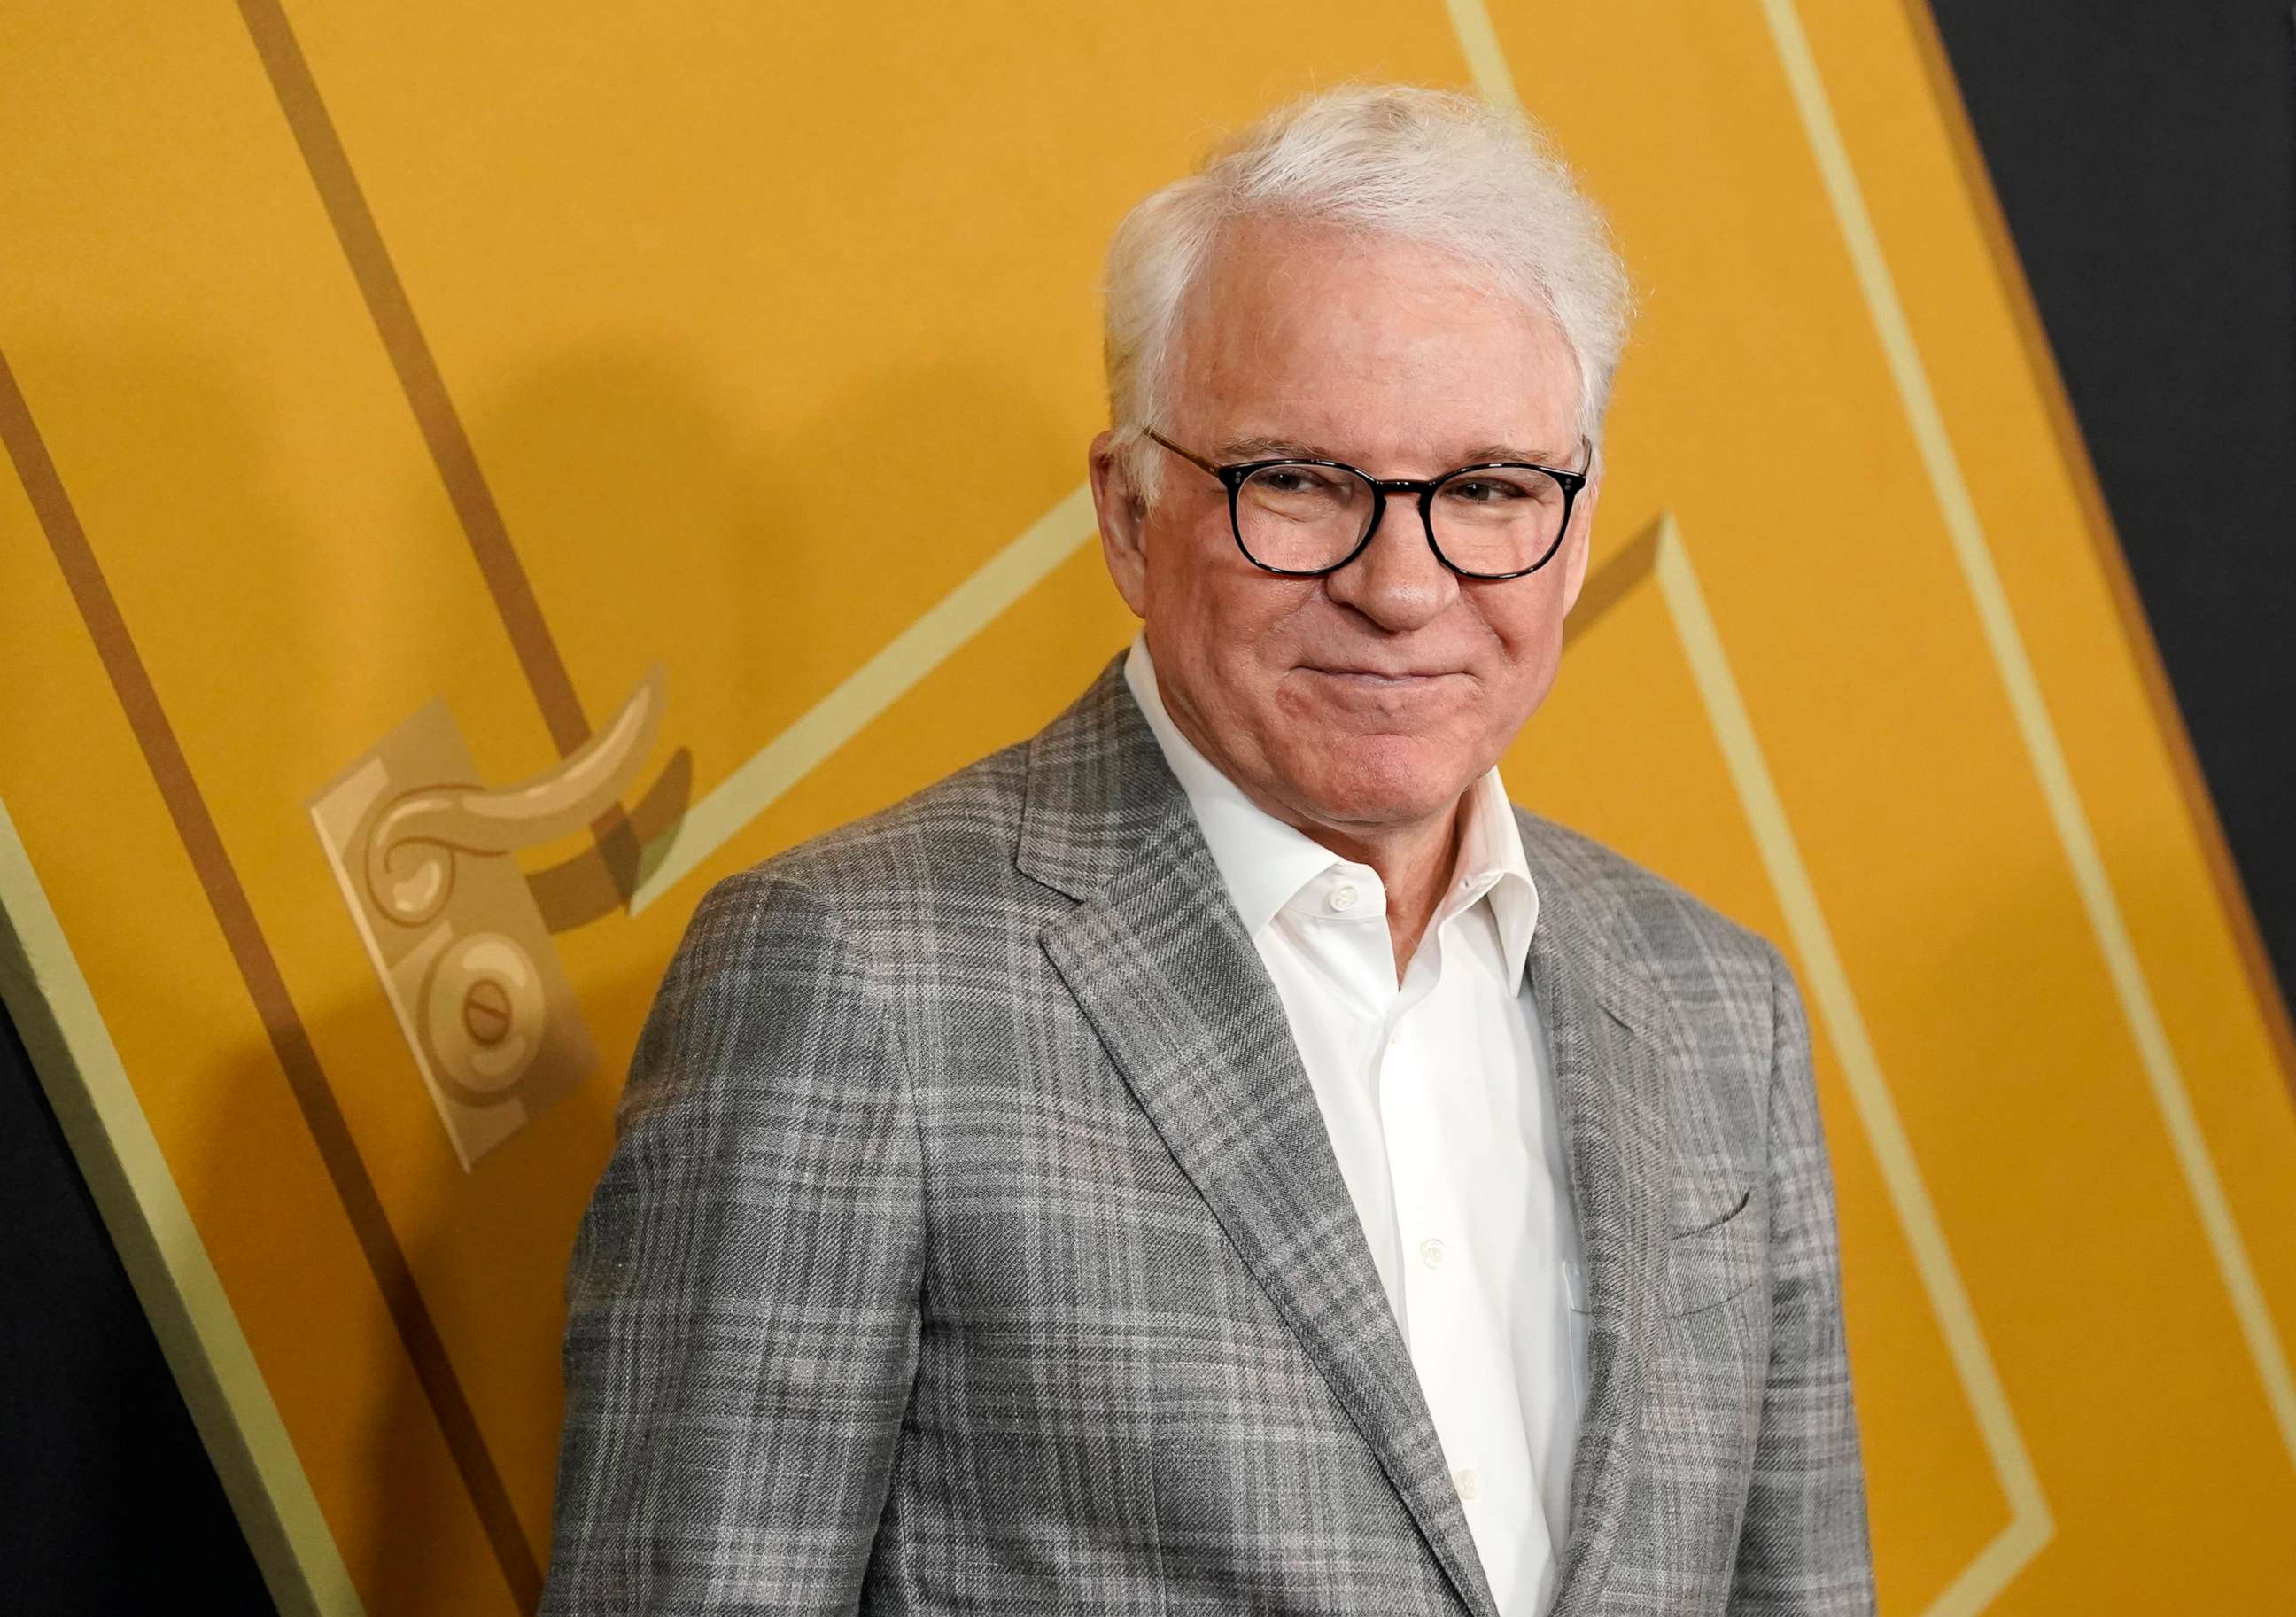 PHOTO: Steve Martin attends the premiere of the second season of "Only Murders in the Building" in Los Angeles, June 27, 2022.